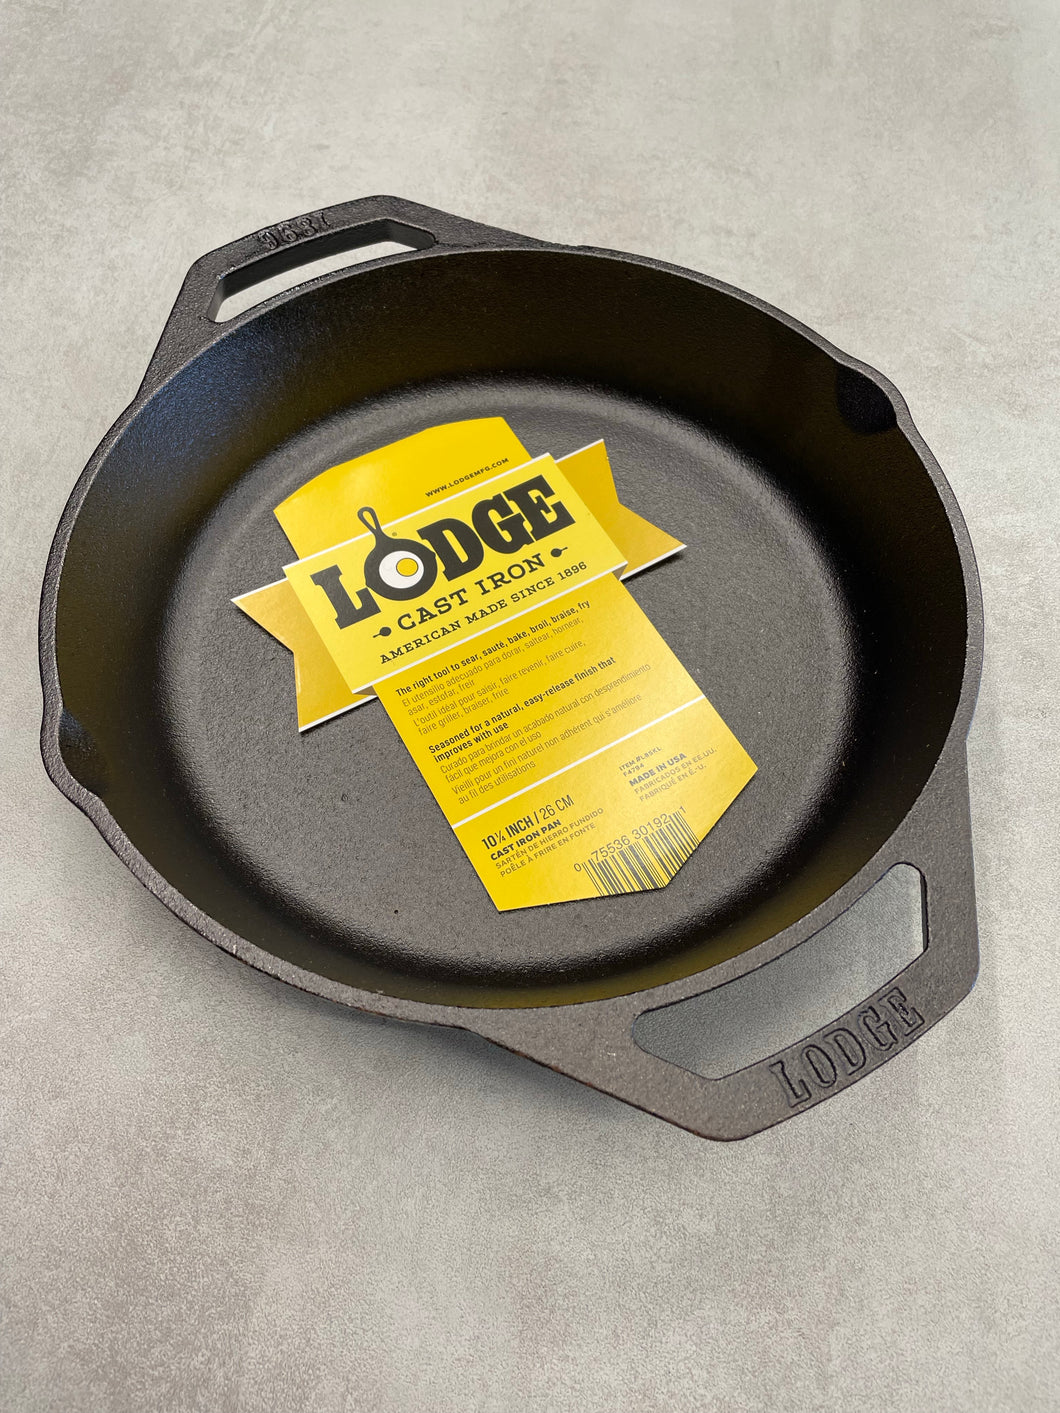 Dual Handle Cast Iron Skillet - 10 inch